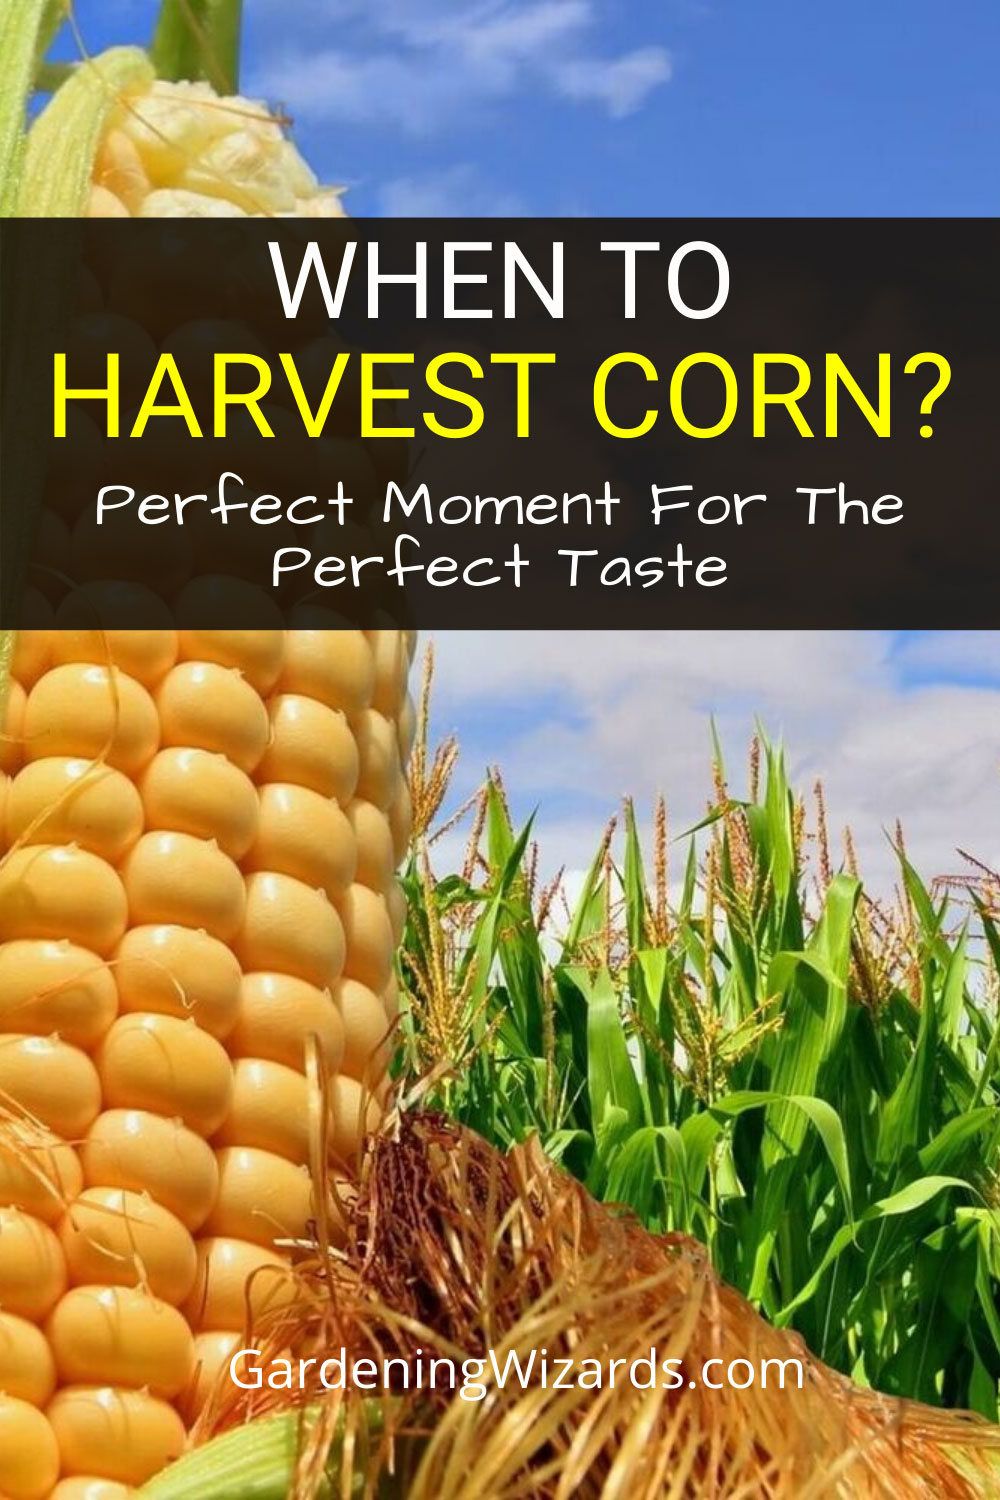 When To Harvest Corn